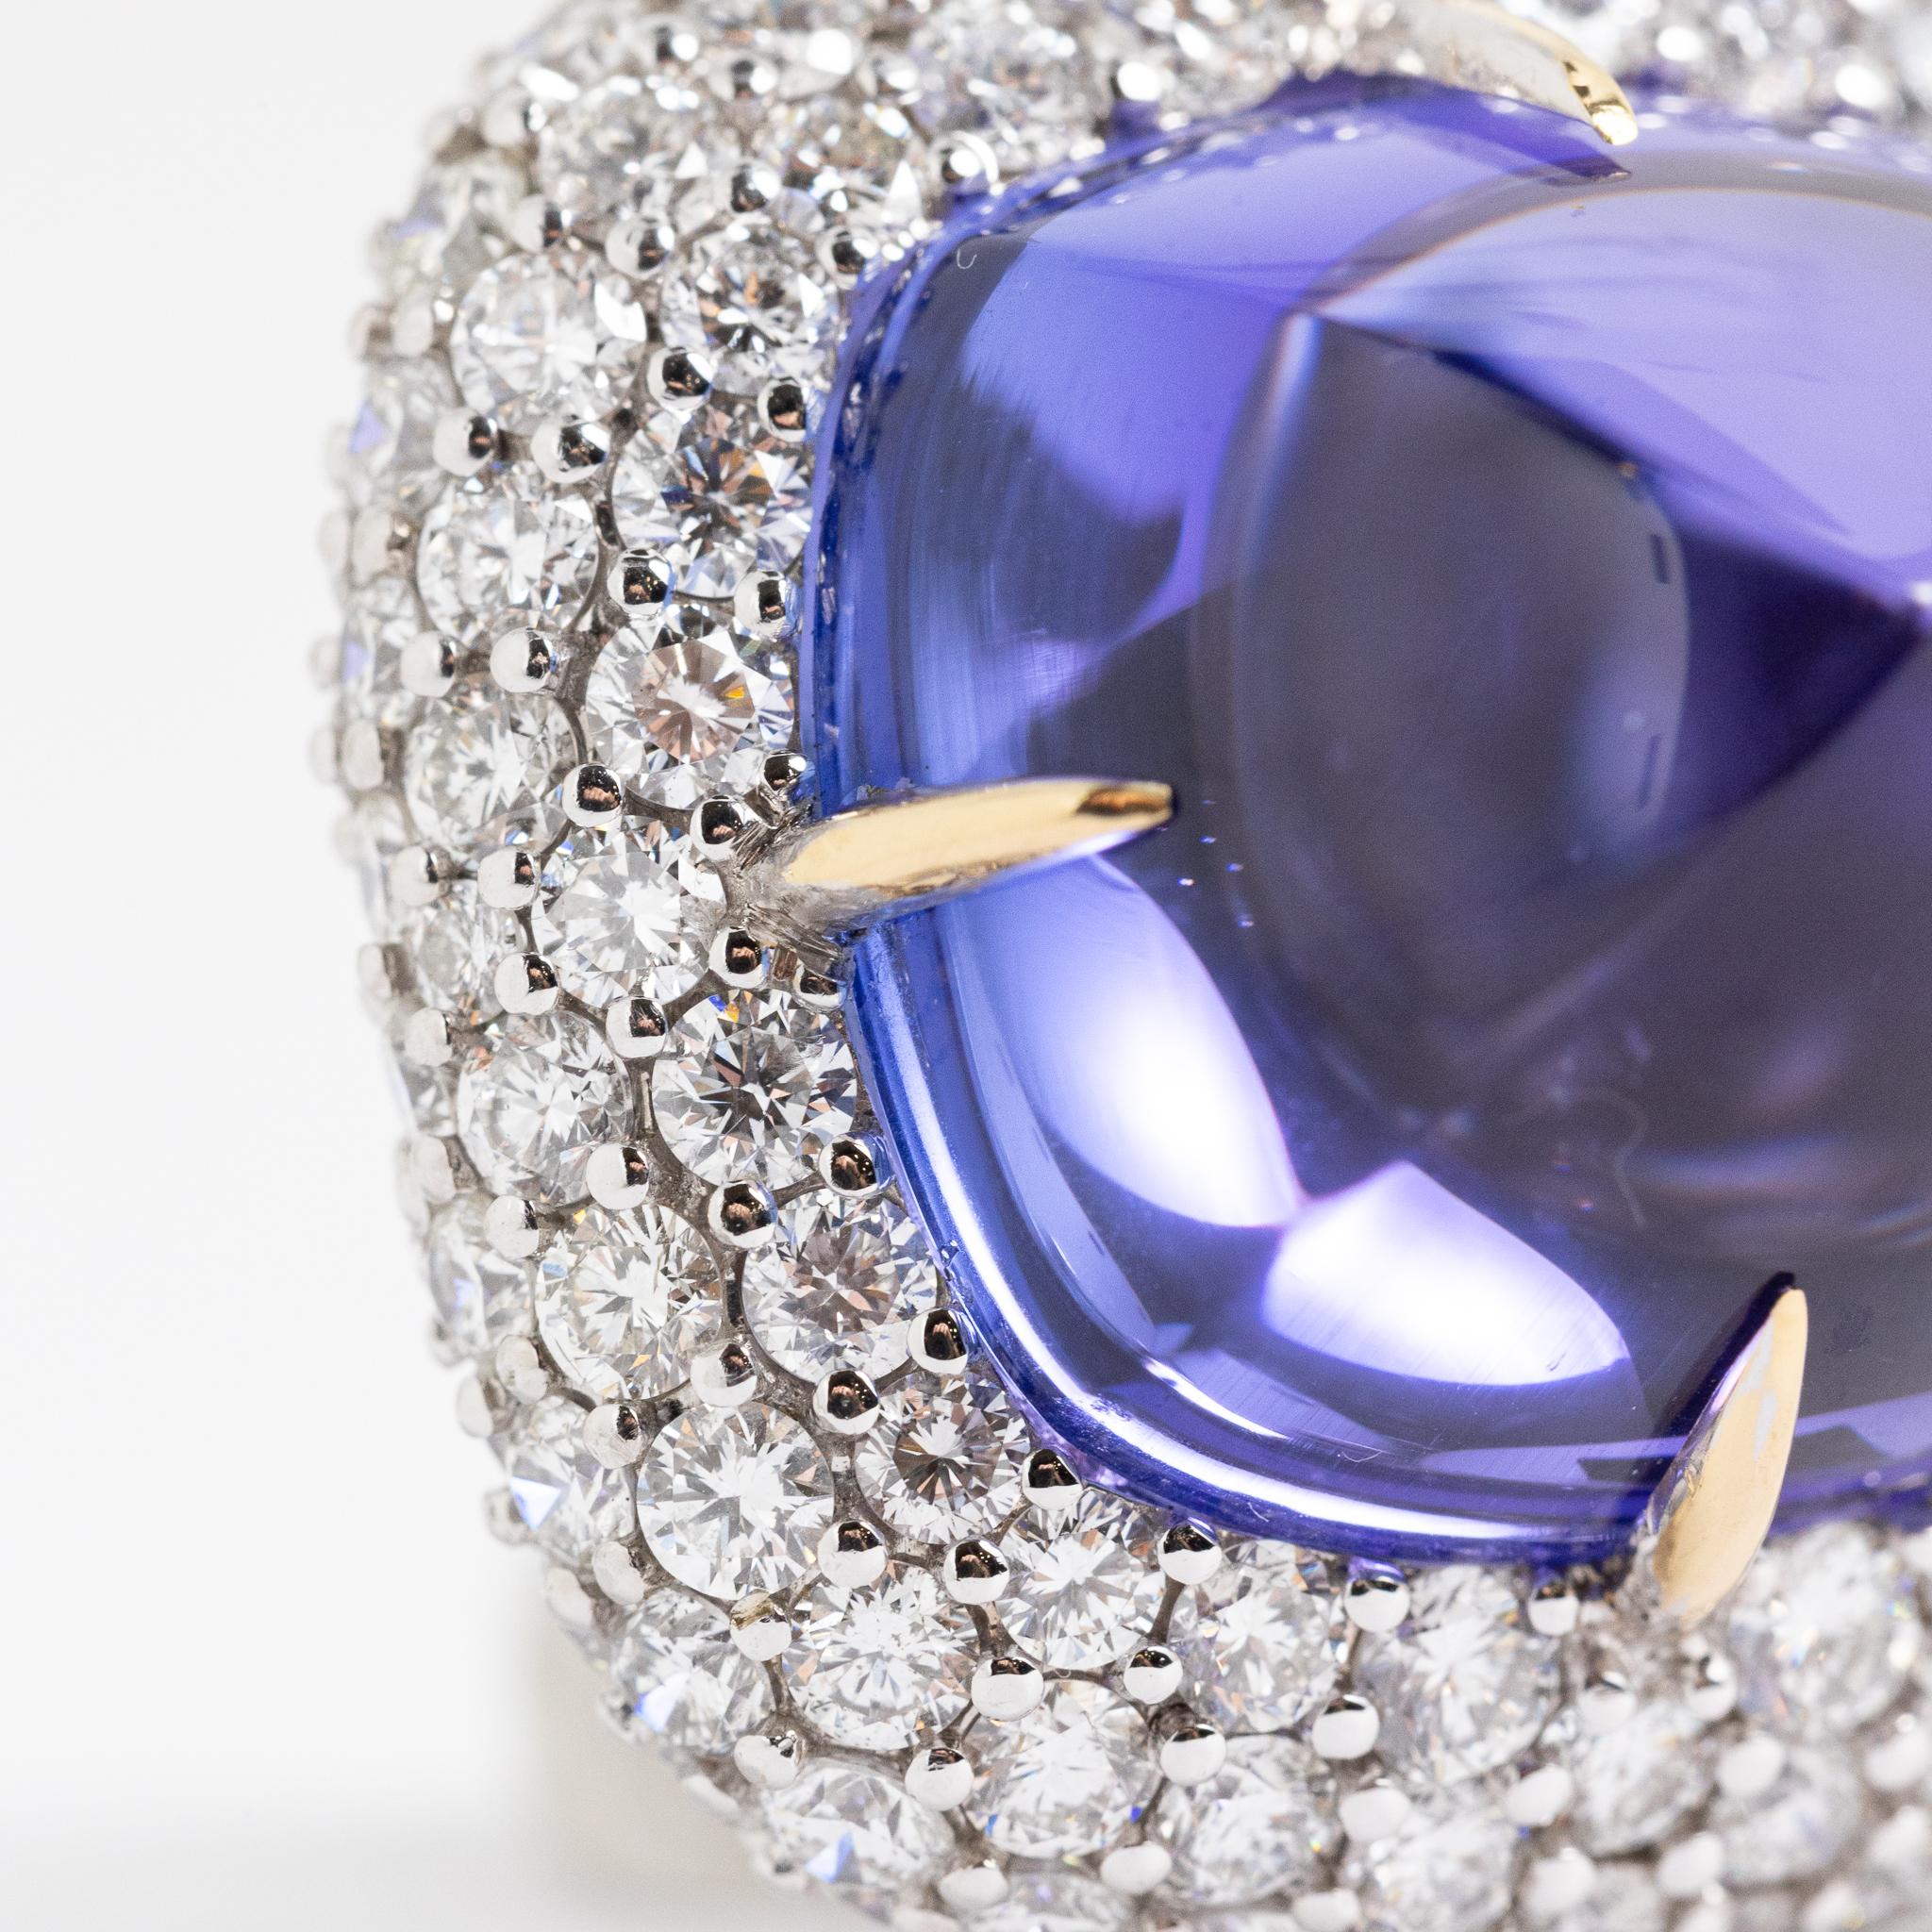 Handcrafted ring made in Italy of 18 kt. white gold with diamonds and tanzanite.
This piece is part of the Diamond Collection  Fraleoni and is one of a kind.
The setting is made with pavé diamonds surrounding sugarloaf-cut tanzanite.
2015

Round-cut